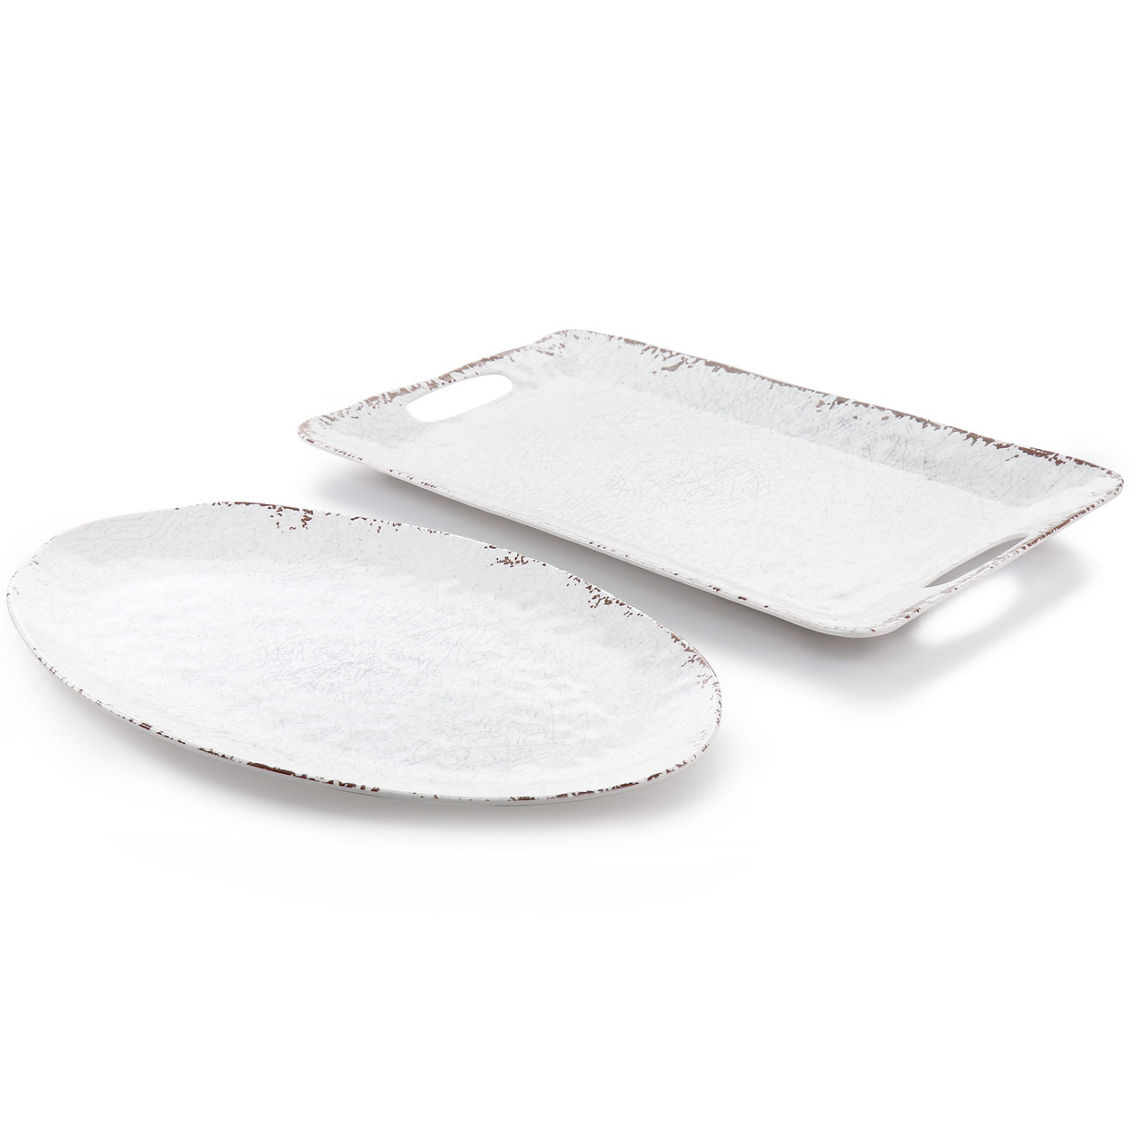 Laurie Gates Mauna 2 Piece Melamine Serving Tray Set in White - Image 2 of 5